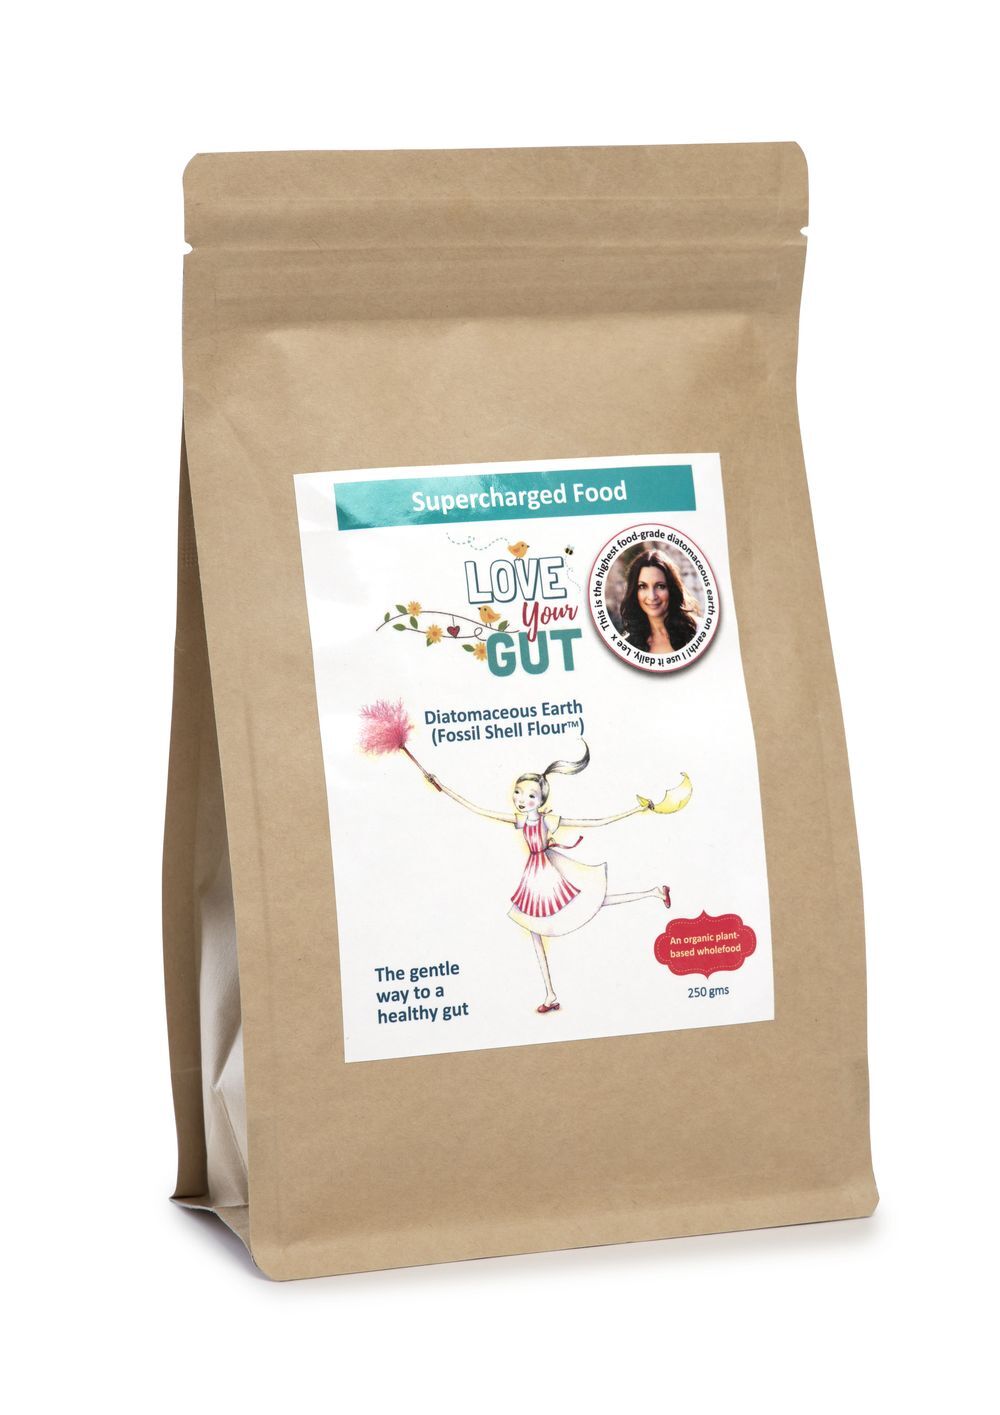 Supercharged Food Diatomaceous Earth 250g